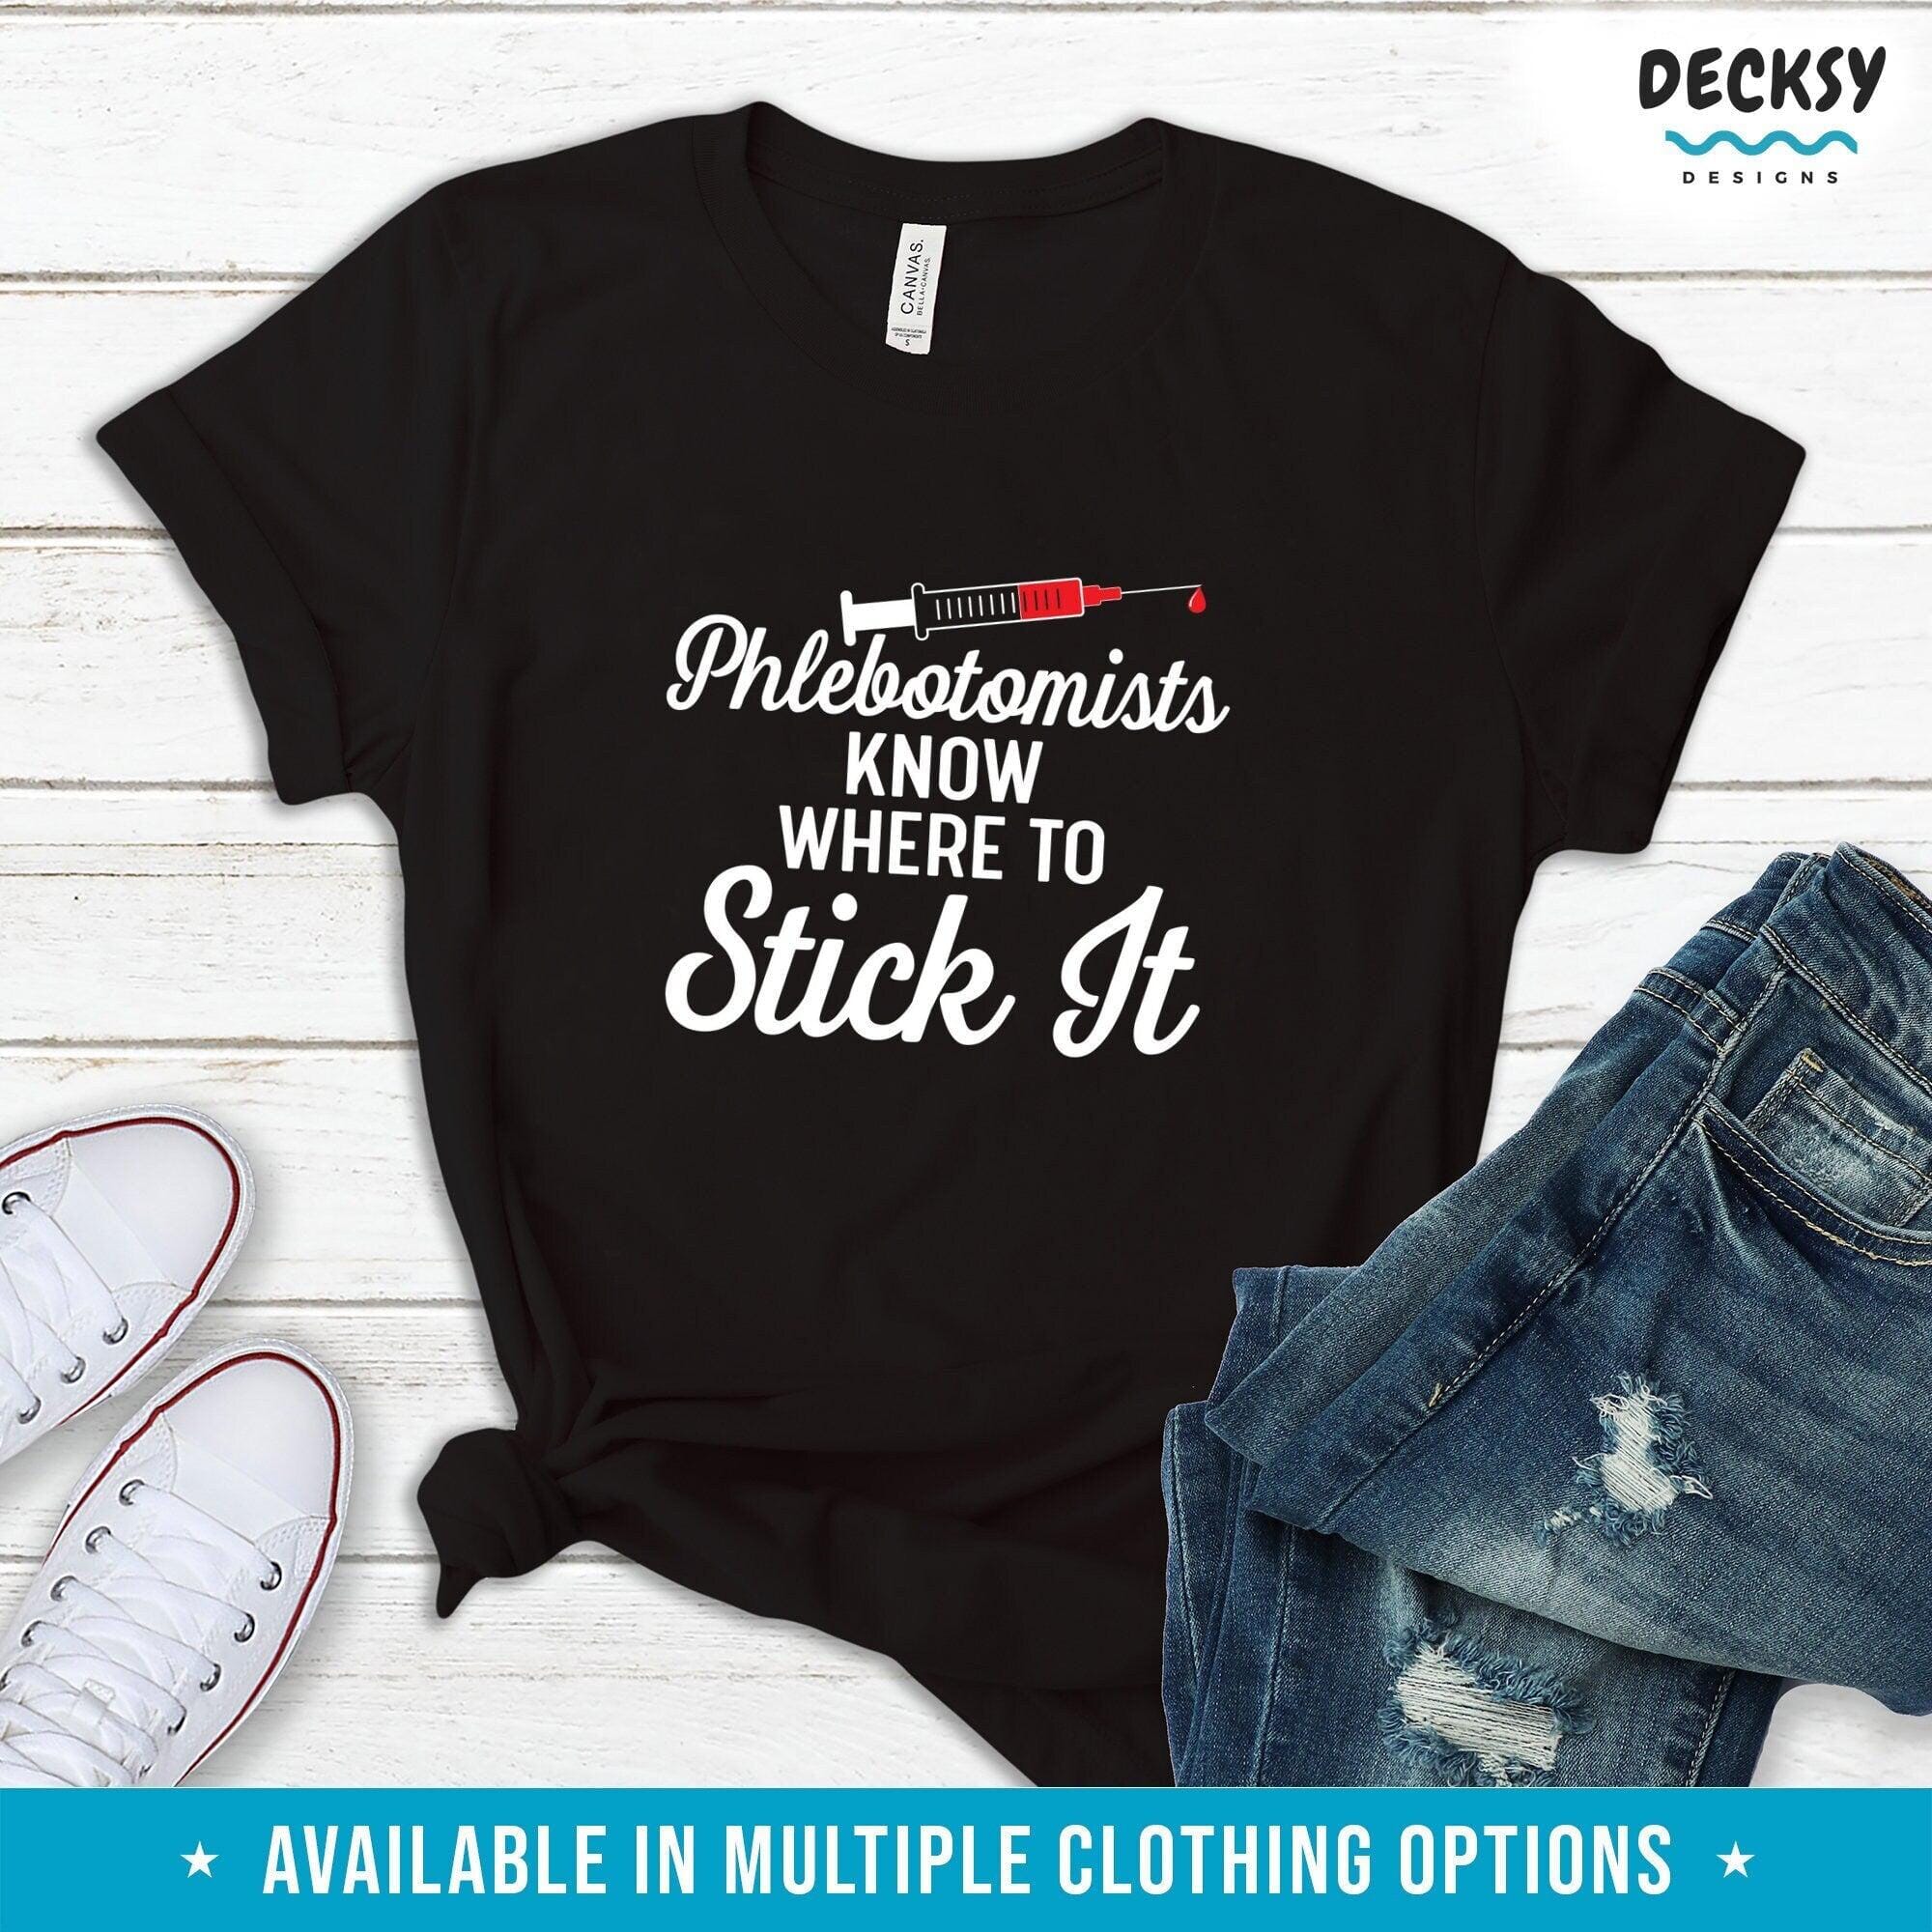 Phlebotomist T Shirt, Lab Scientist Gift-Clothing:Gender-Neutral Adult Clothing:Tops & Tees:T-shirts:Graphic Tees-DecksyDesigns